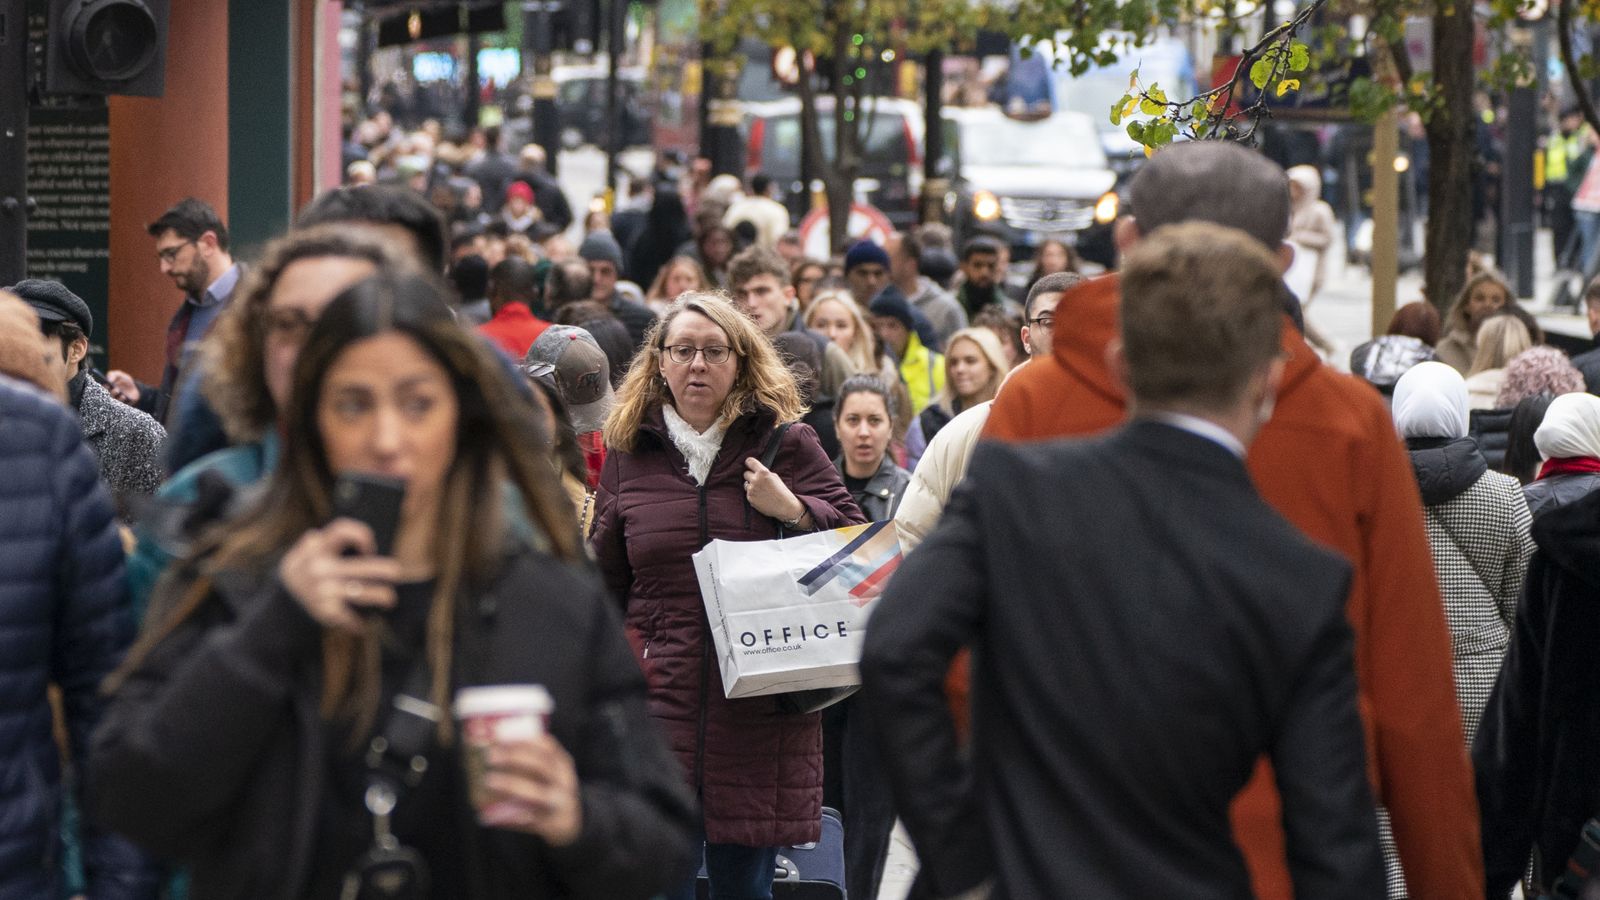 Black Friday shoppers warned to beware of 'dud deals'